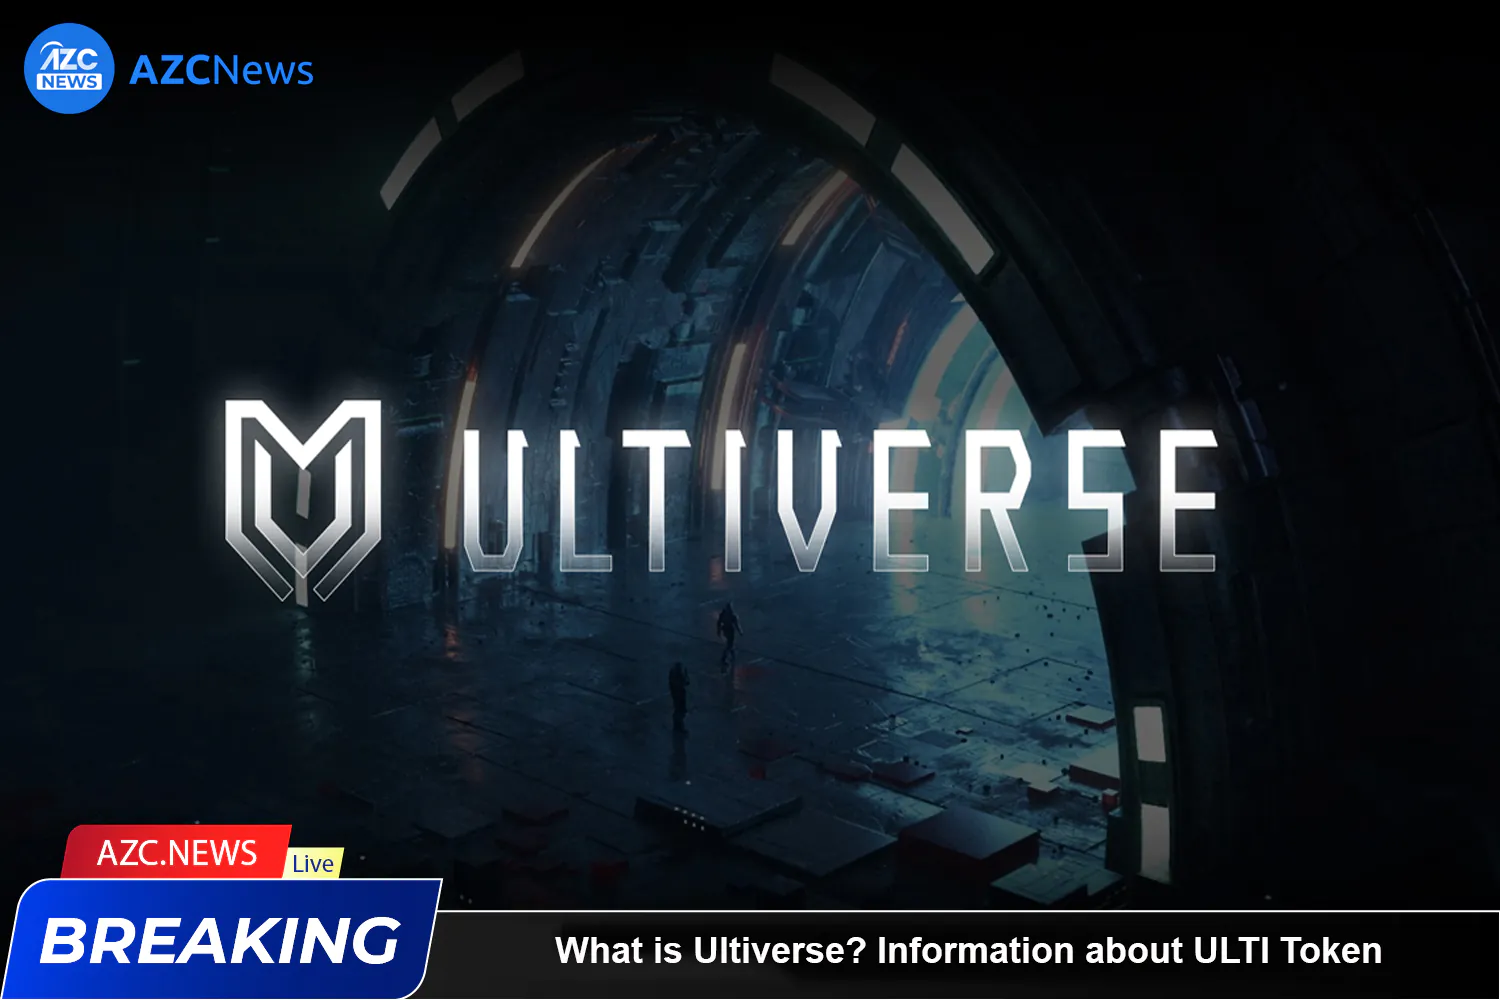 What Is Ultiverse Azc